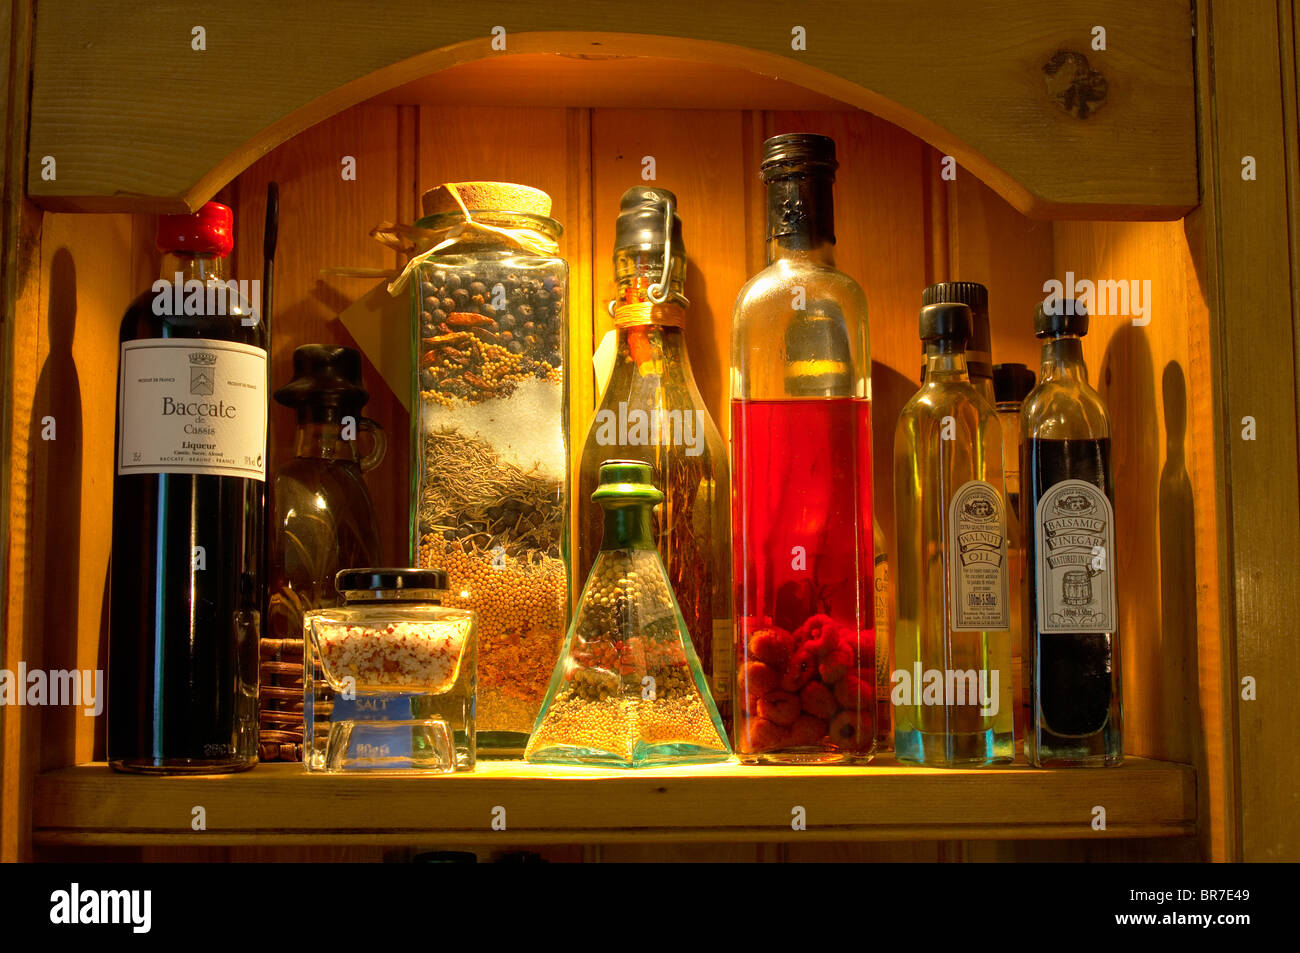 Oils and vinegars bottles with spice jars in a kitchen store cupboard Stock Photo